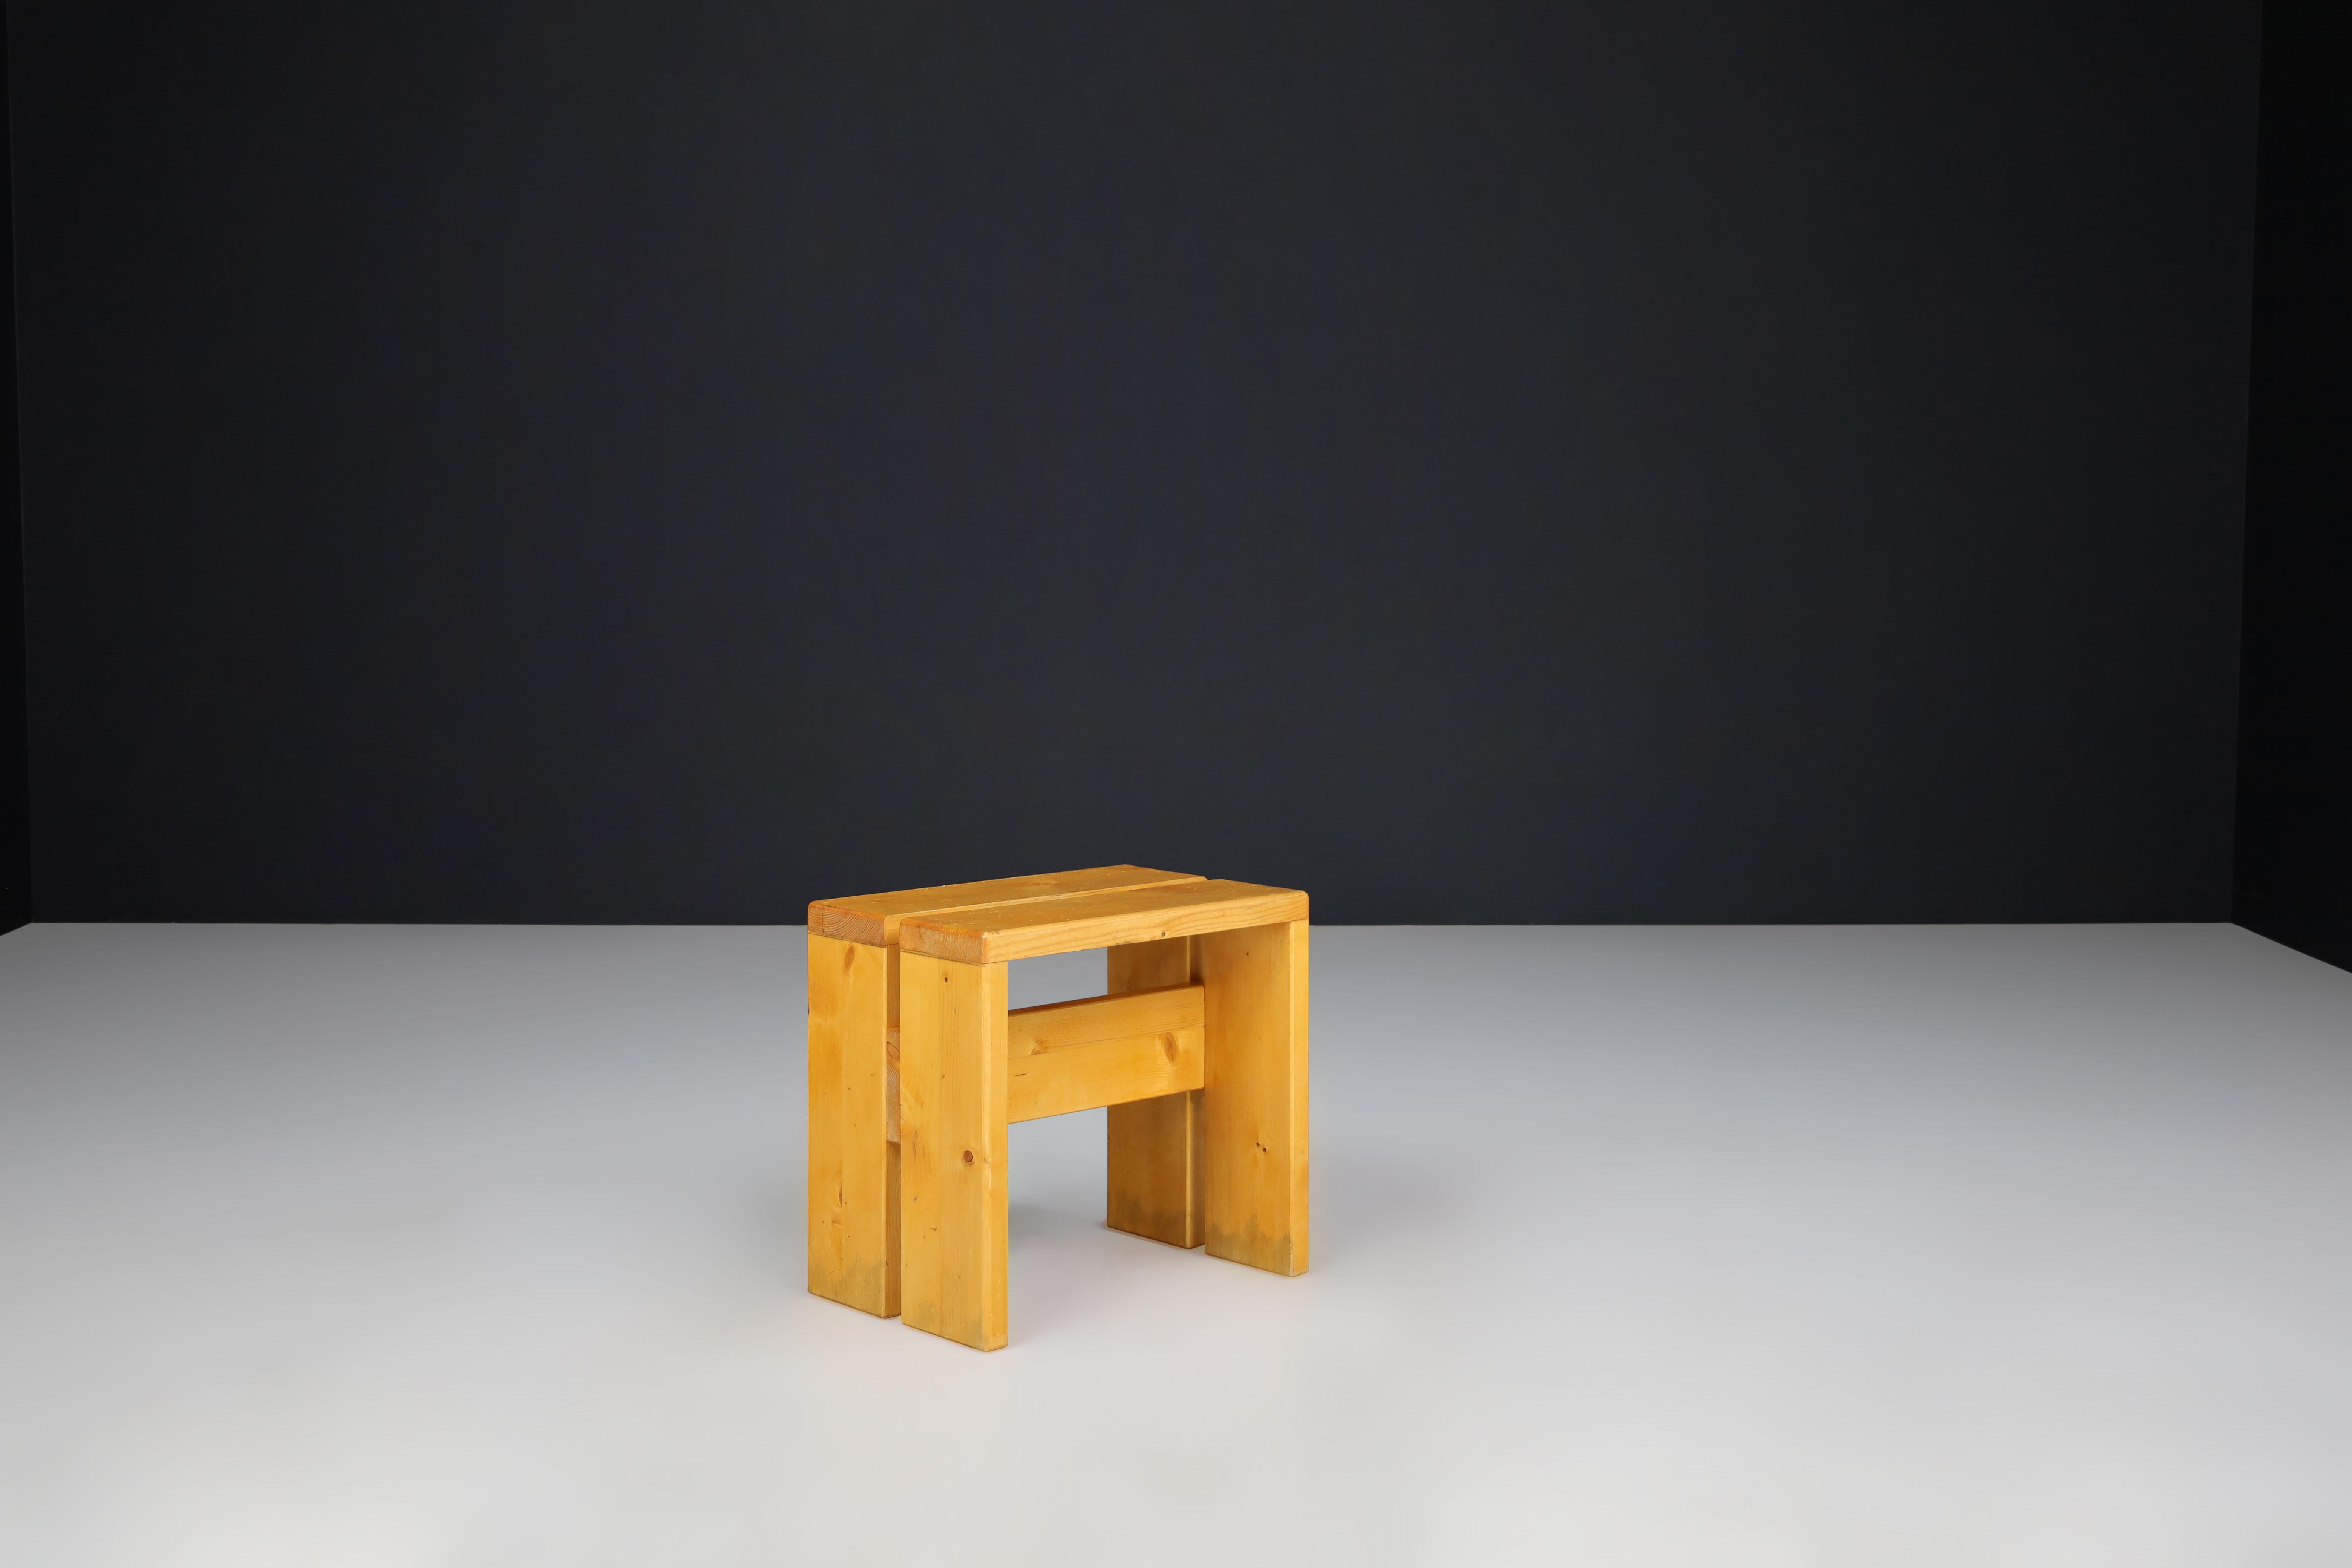 Pine Wood Charlotte Perriand Stools for Les Arcs, France, 1960s For Sale 5